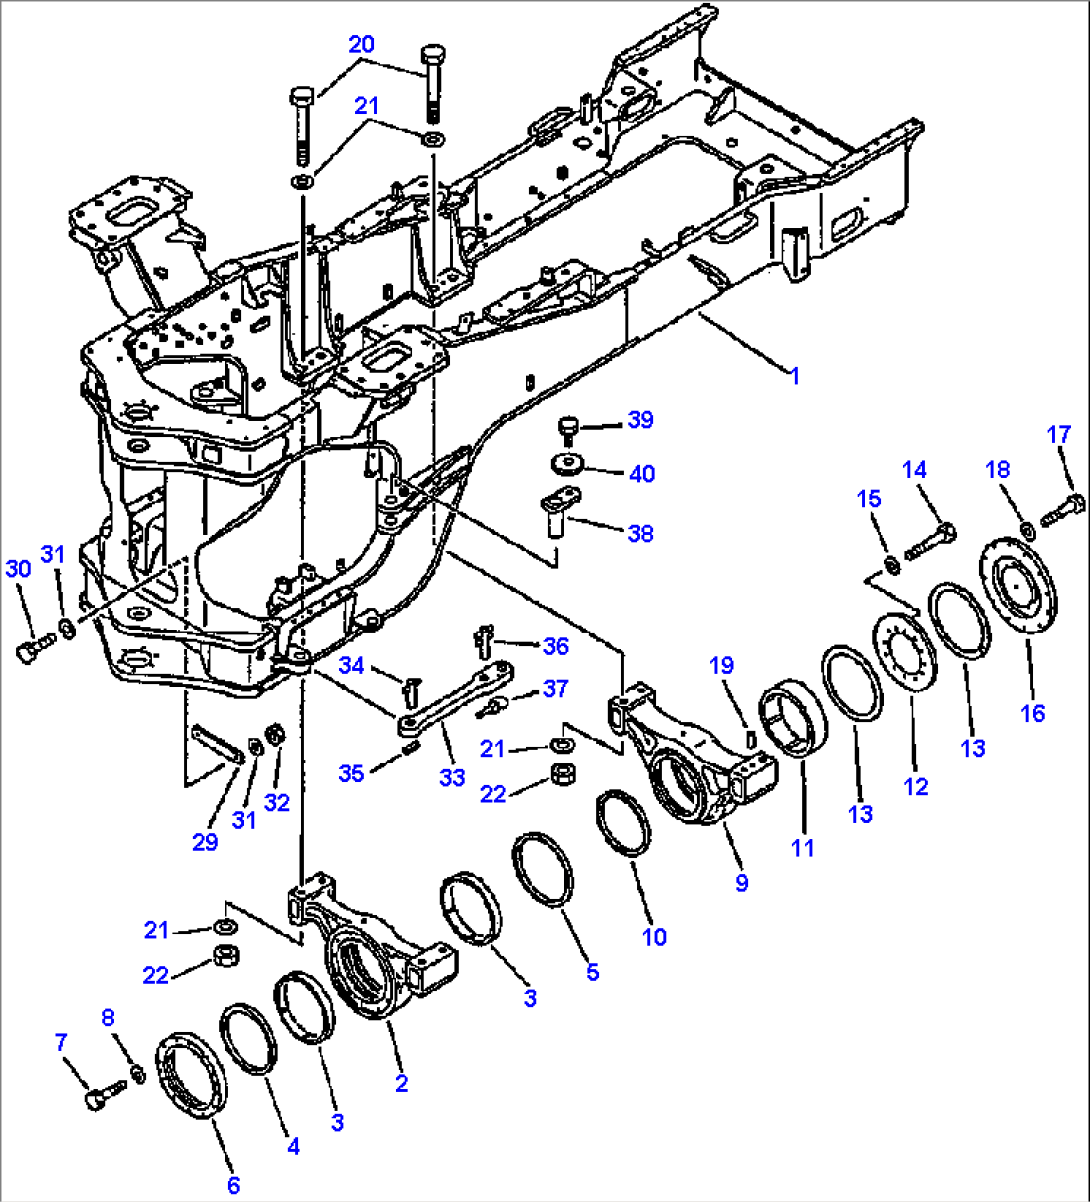 REAR FRAME FOR LOAD AND CARRY APPLICATION